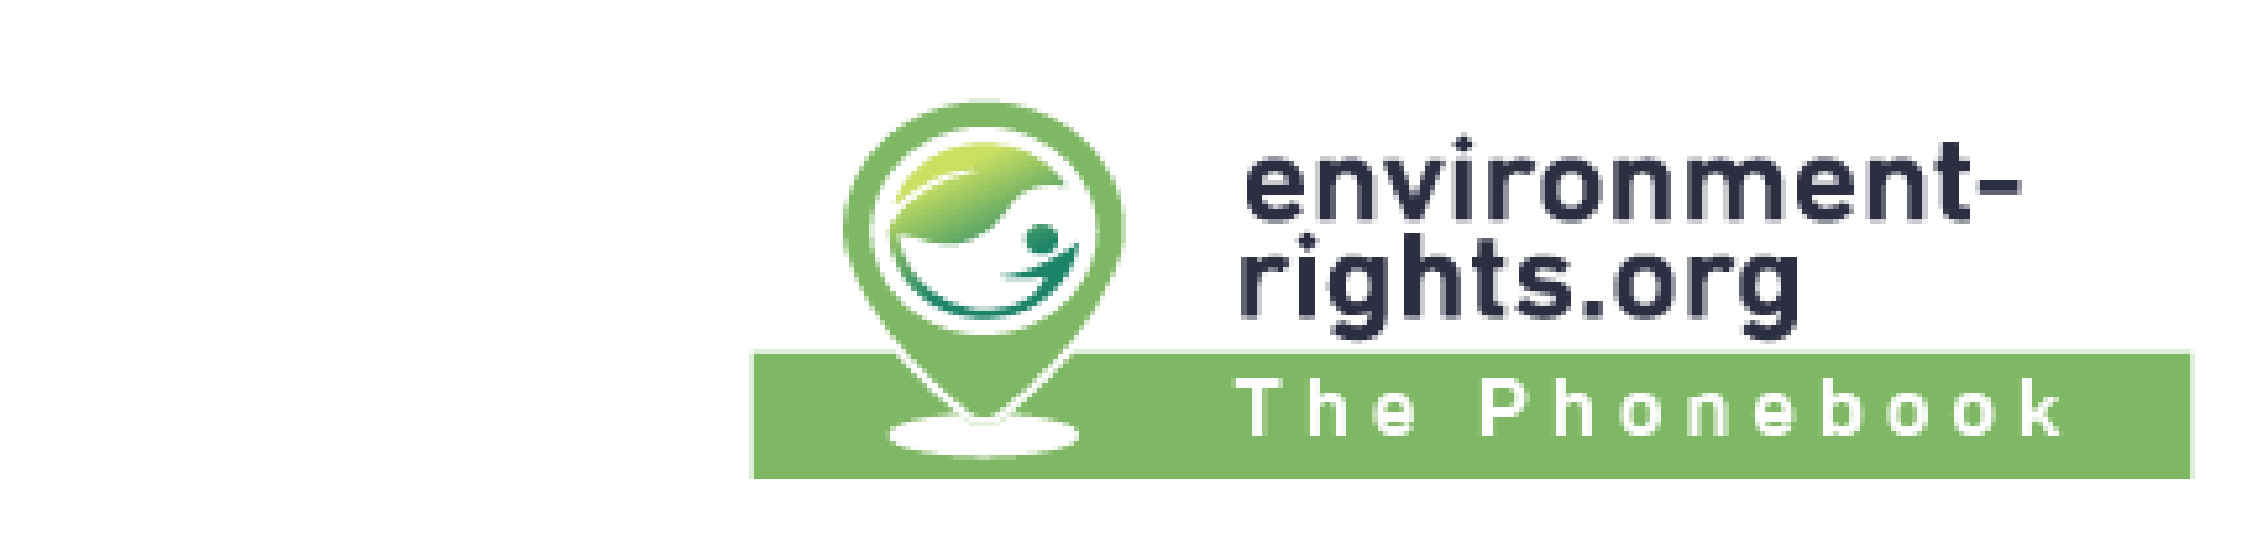 The Phonebook of environmental human rights defenders